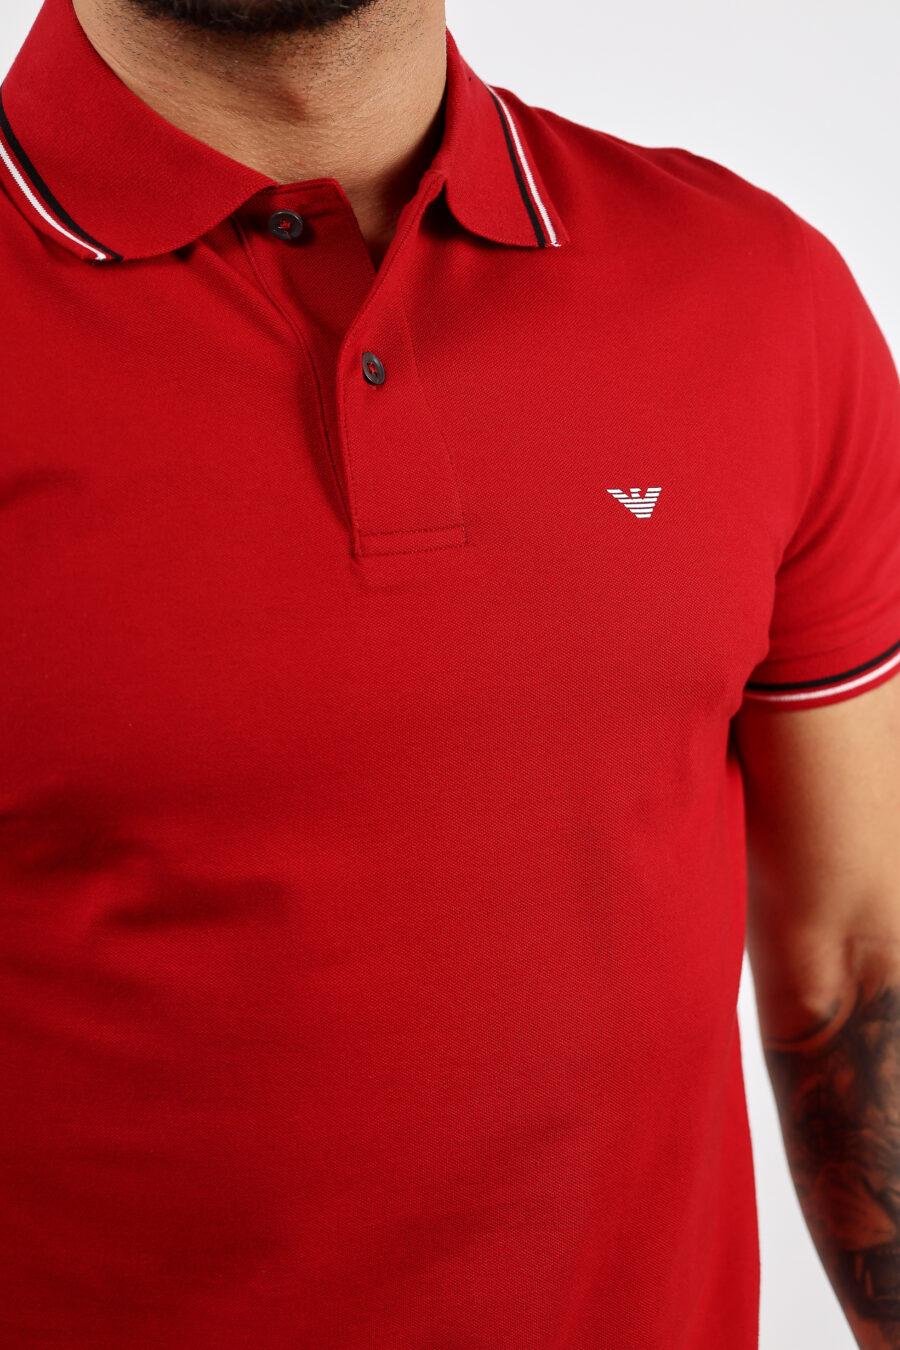 Red knitted polo shirt with striped collar and mini eagle logo - BLS Fashion 65